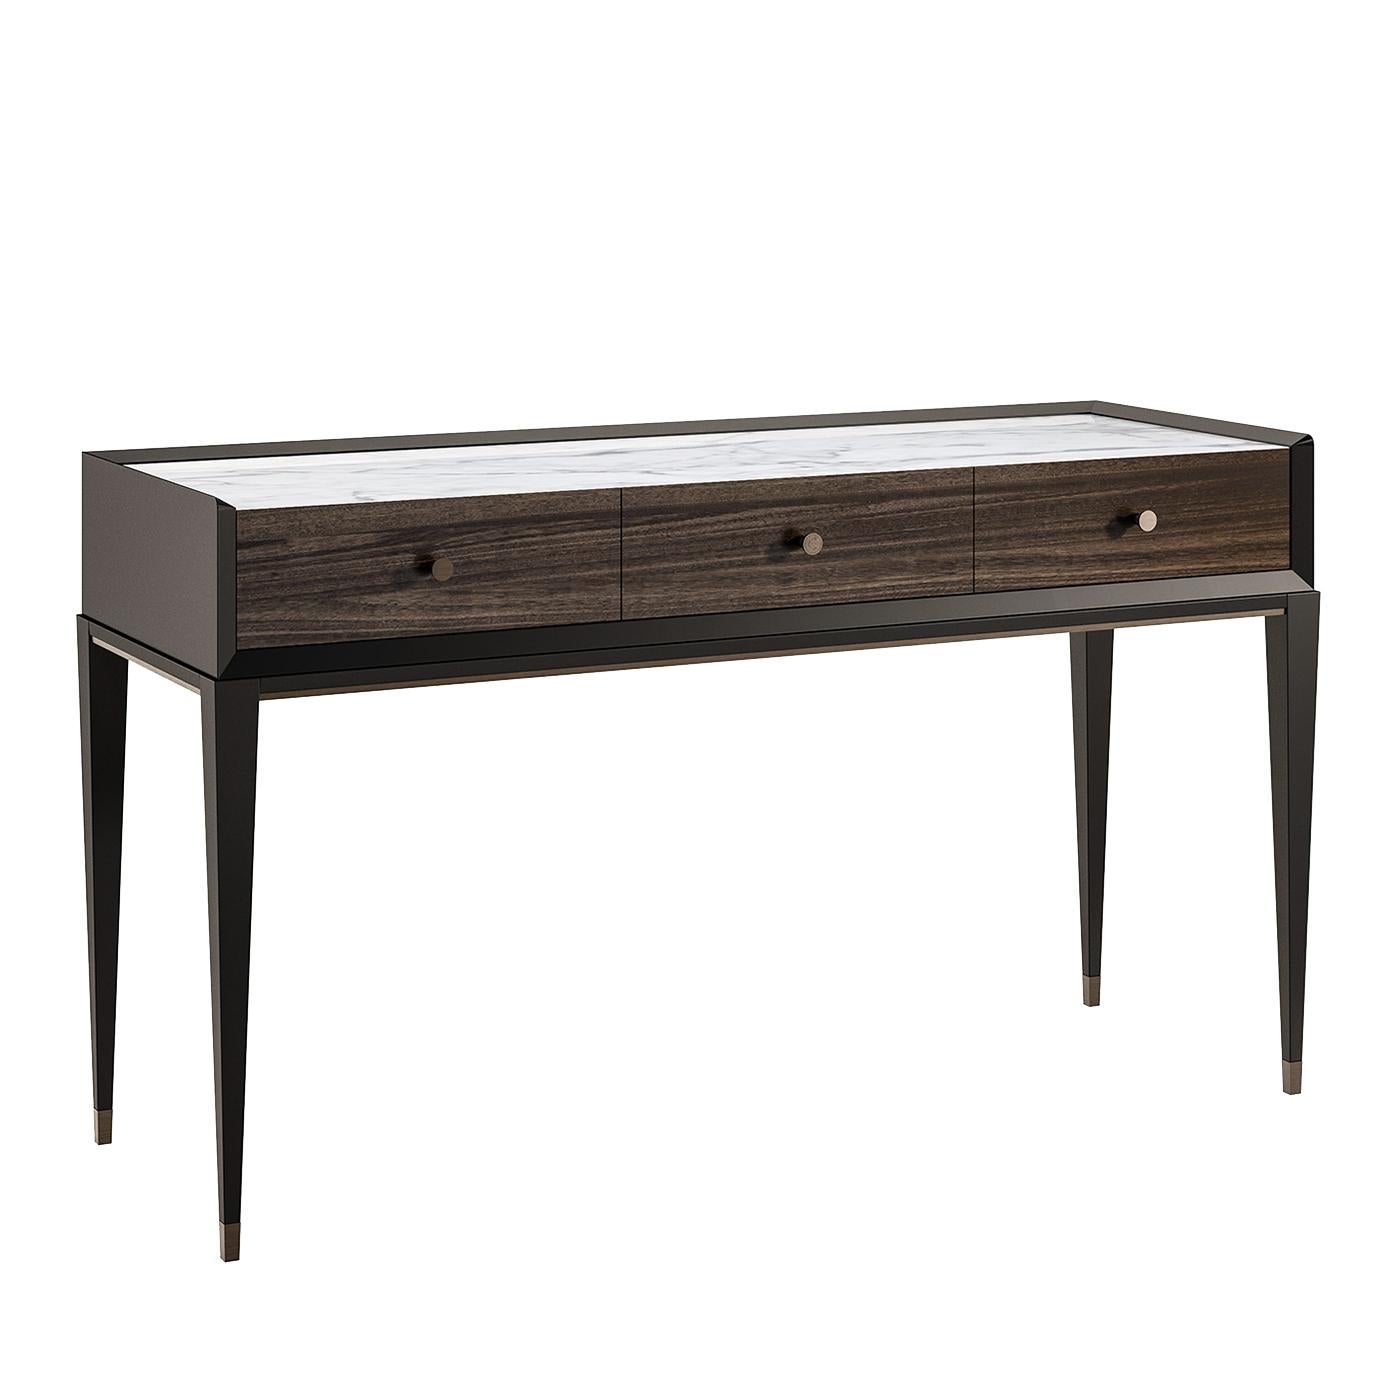 The simple and clear-cut lines of this exquisite console result from impeccable construction and craftsmanship and exudes timeless elegance. The black wooden frame with its sharp, bevelled edges is supported by four slender feet accented with metal